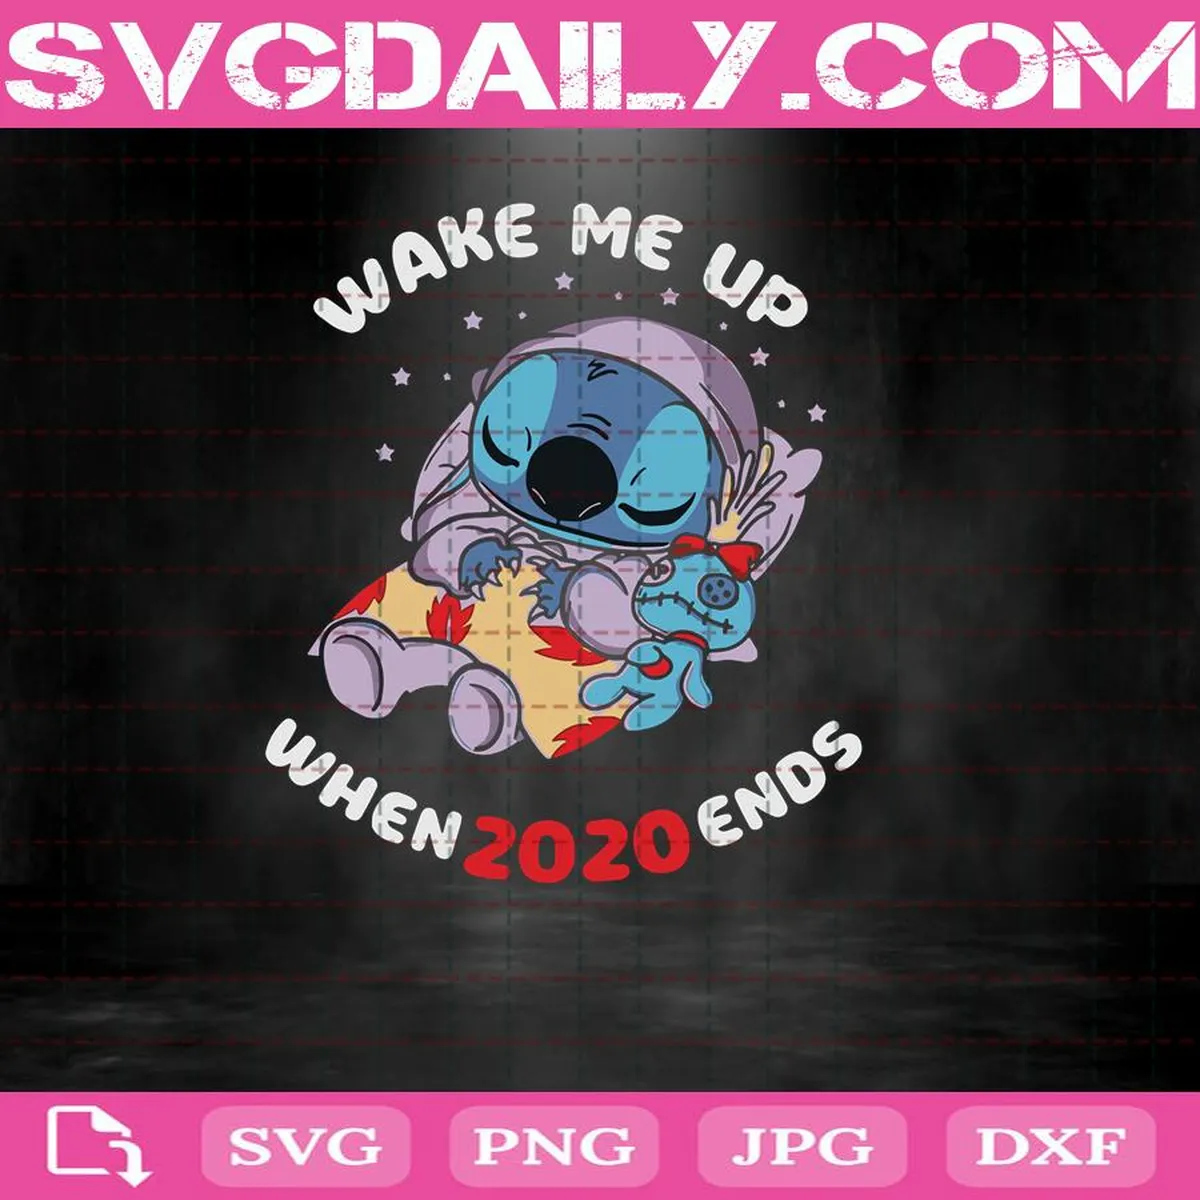 Wake Me Up When 2020 Ends Svg, Christmas Svg, Stitch Svg, Stitch Christmas Svg, Wake Me Up When 2020 Ends Svg, Stitch Sleeping Svg, Merry Christmas Svg